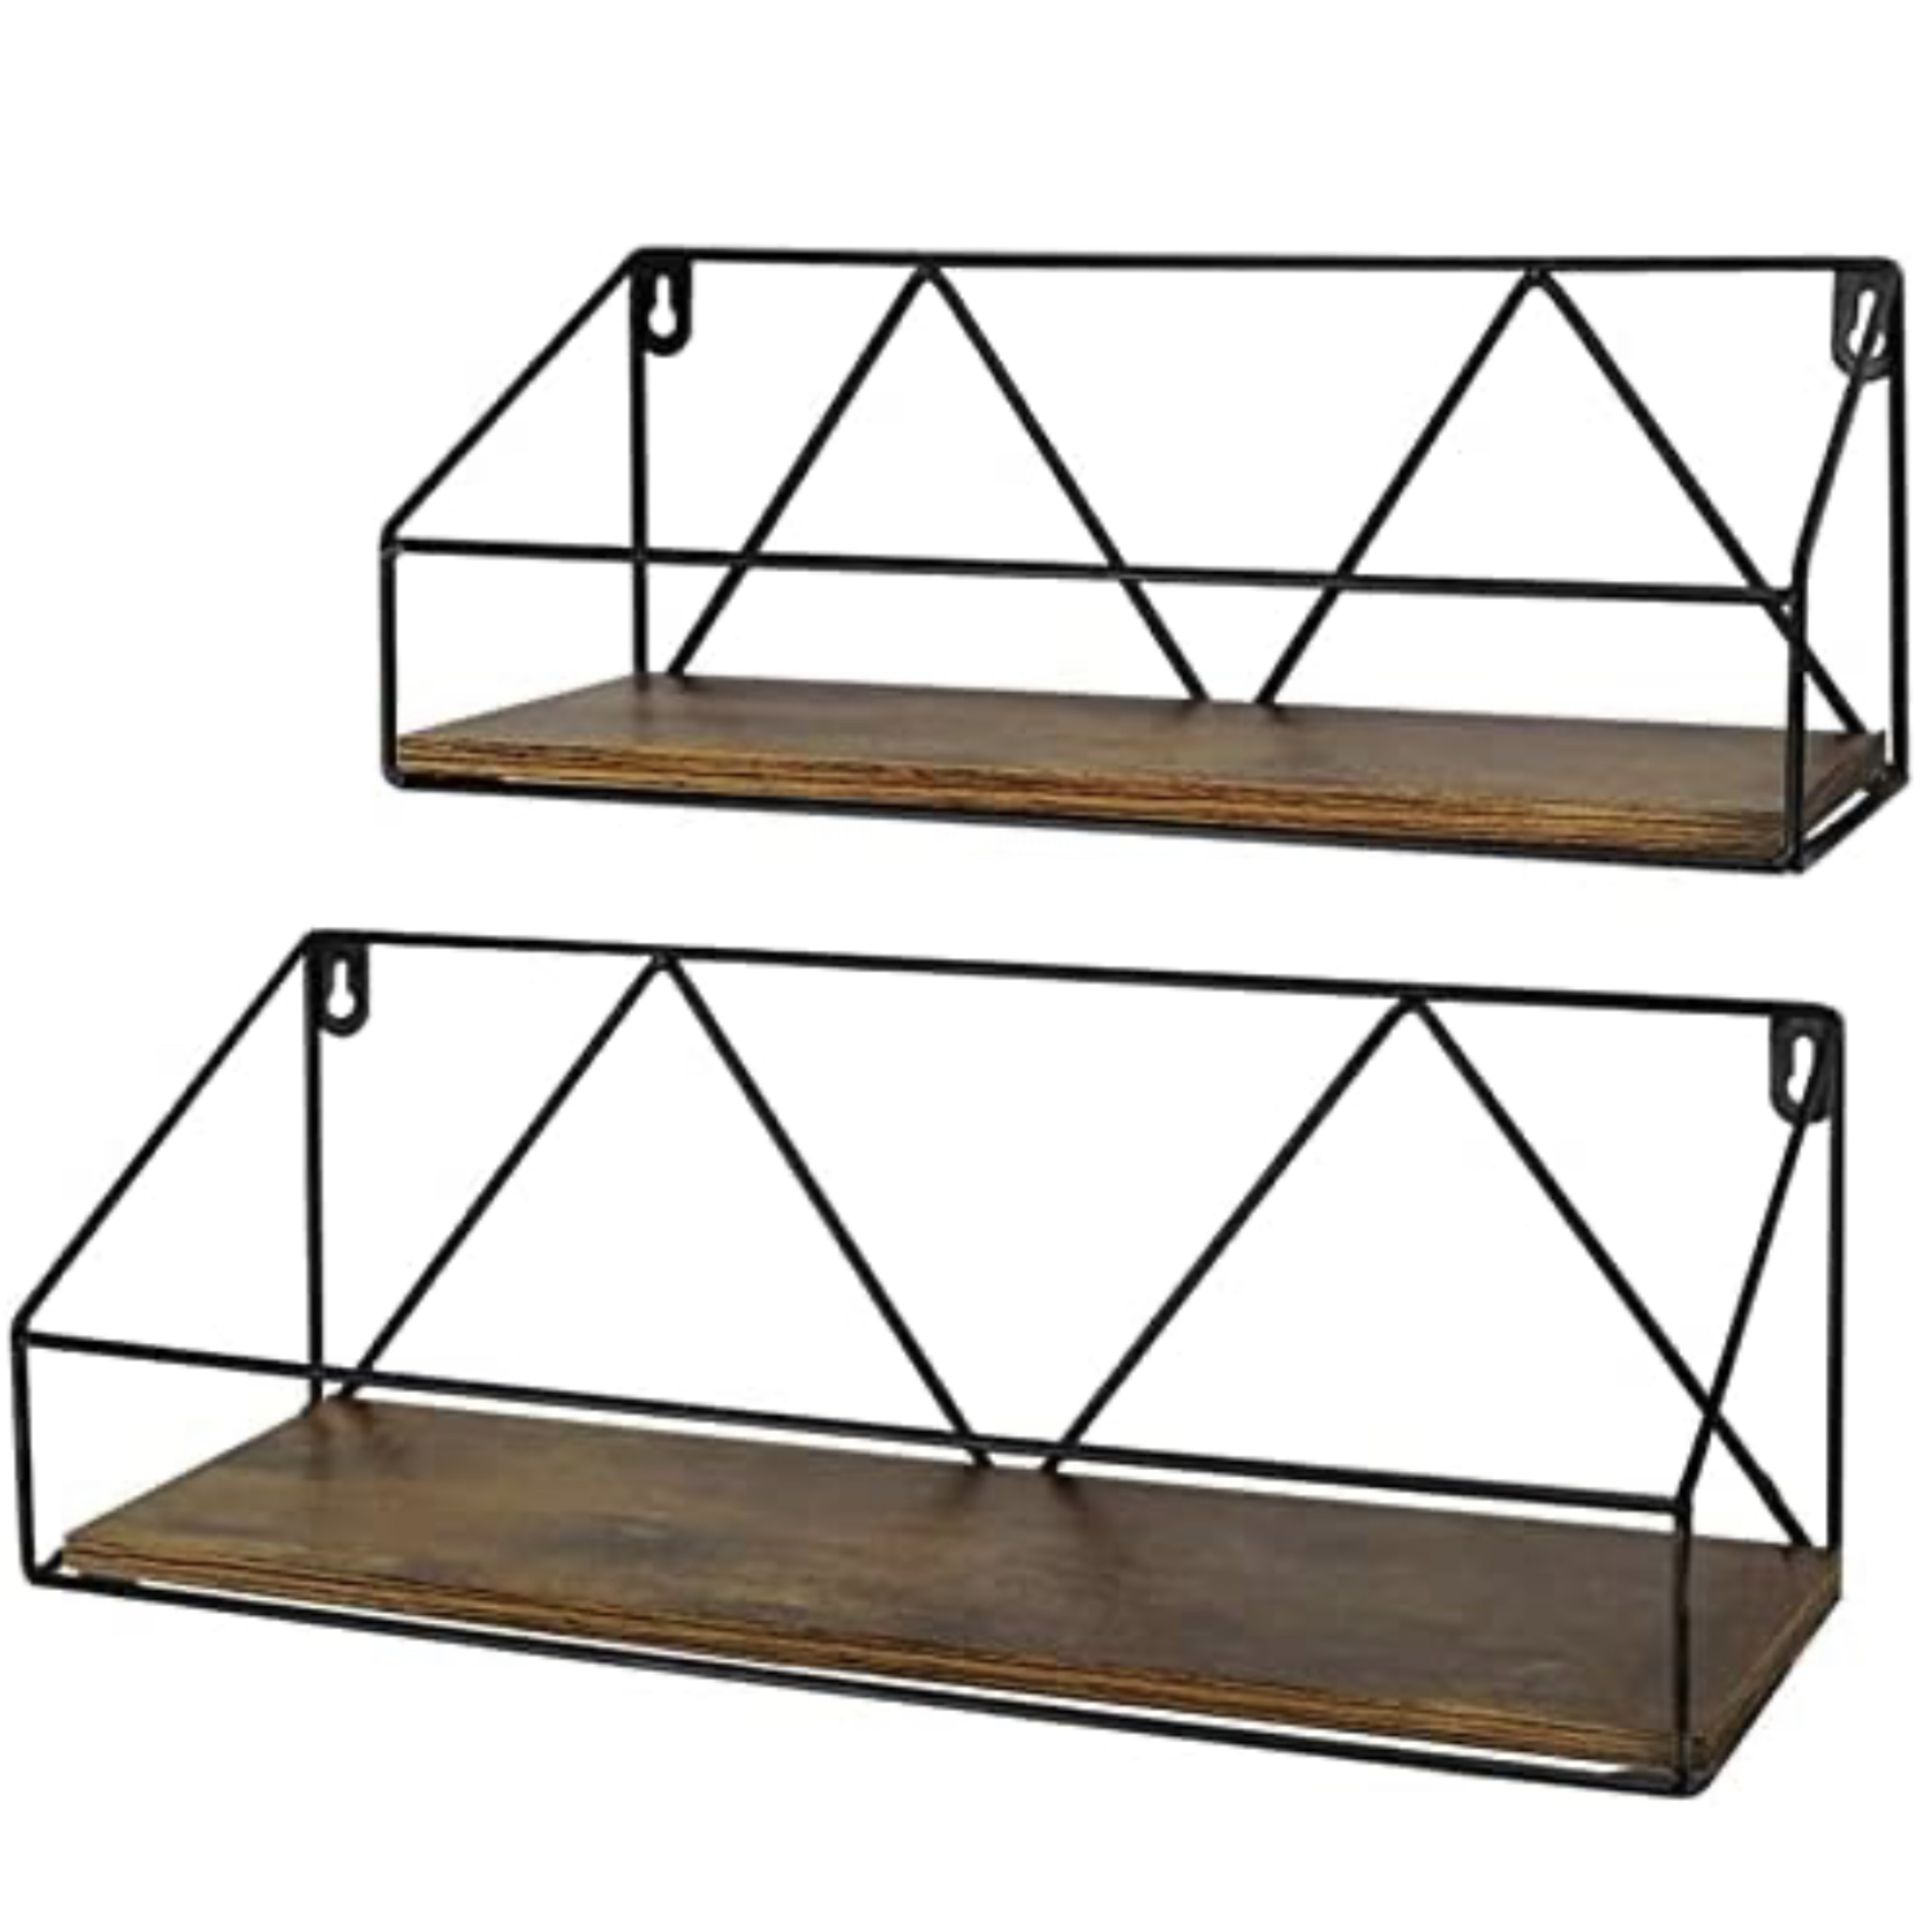 Umi Floating Wall Shelves Set of 2 Rustic Wooden Shelves RRP £19.99